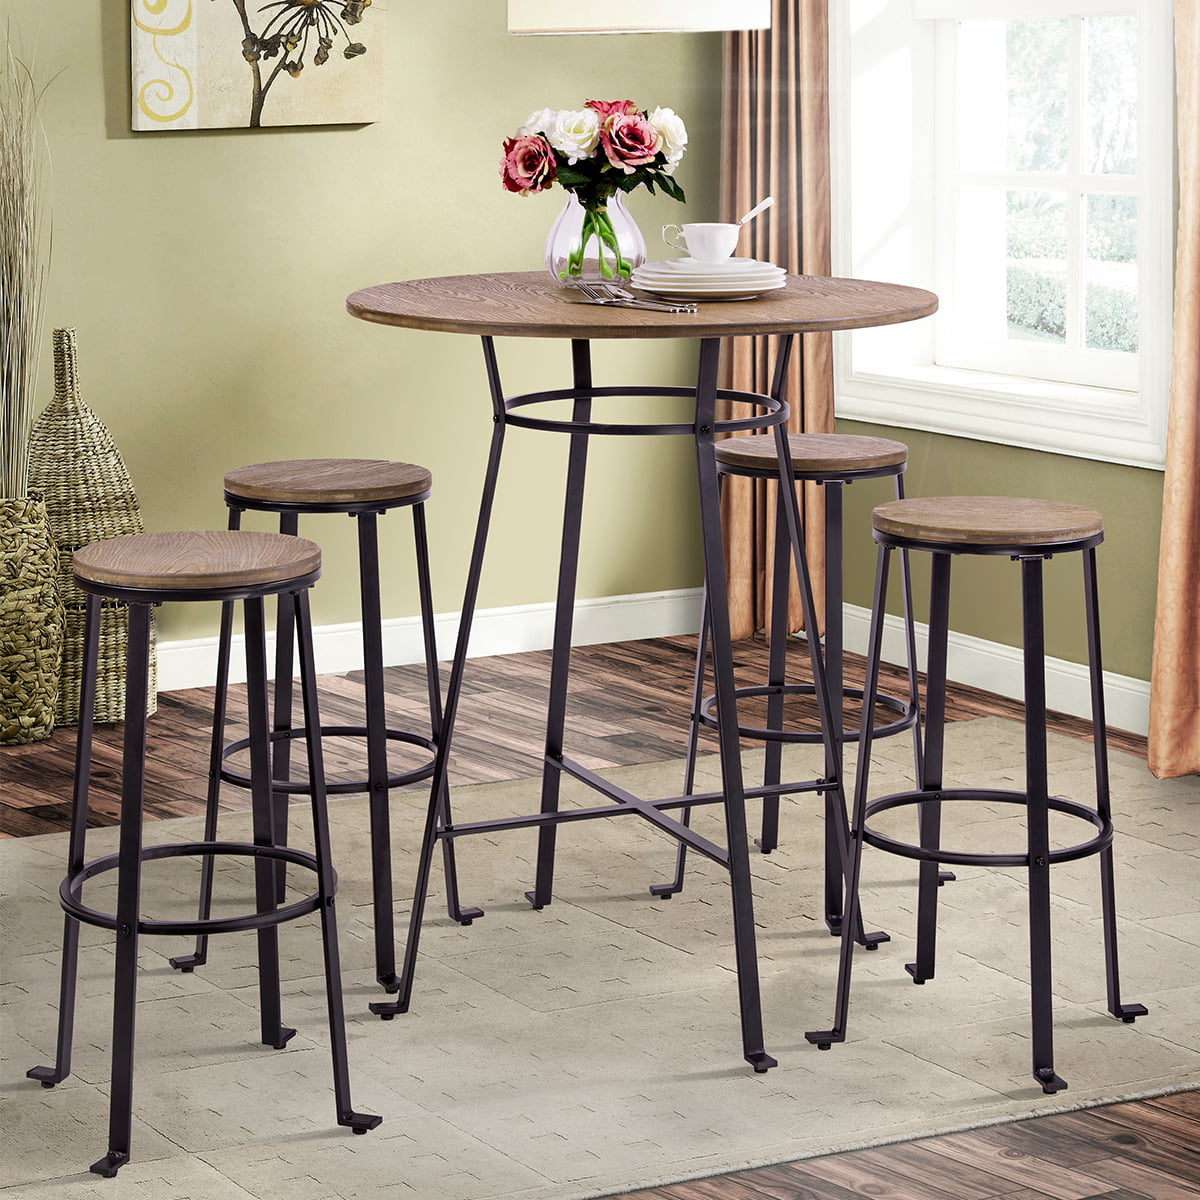 Industrial Backless Metal Bar Stools, Clearance Counter Height Bar Stools